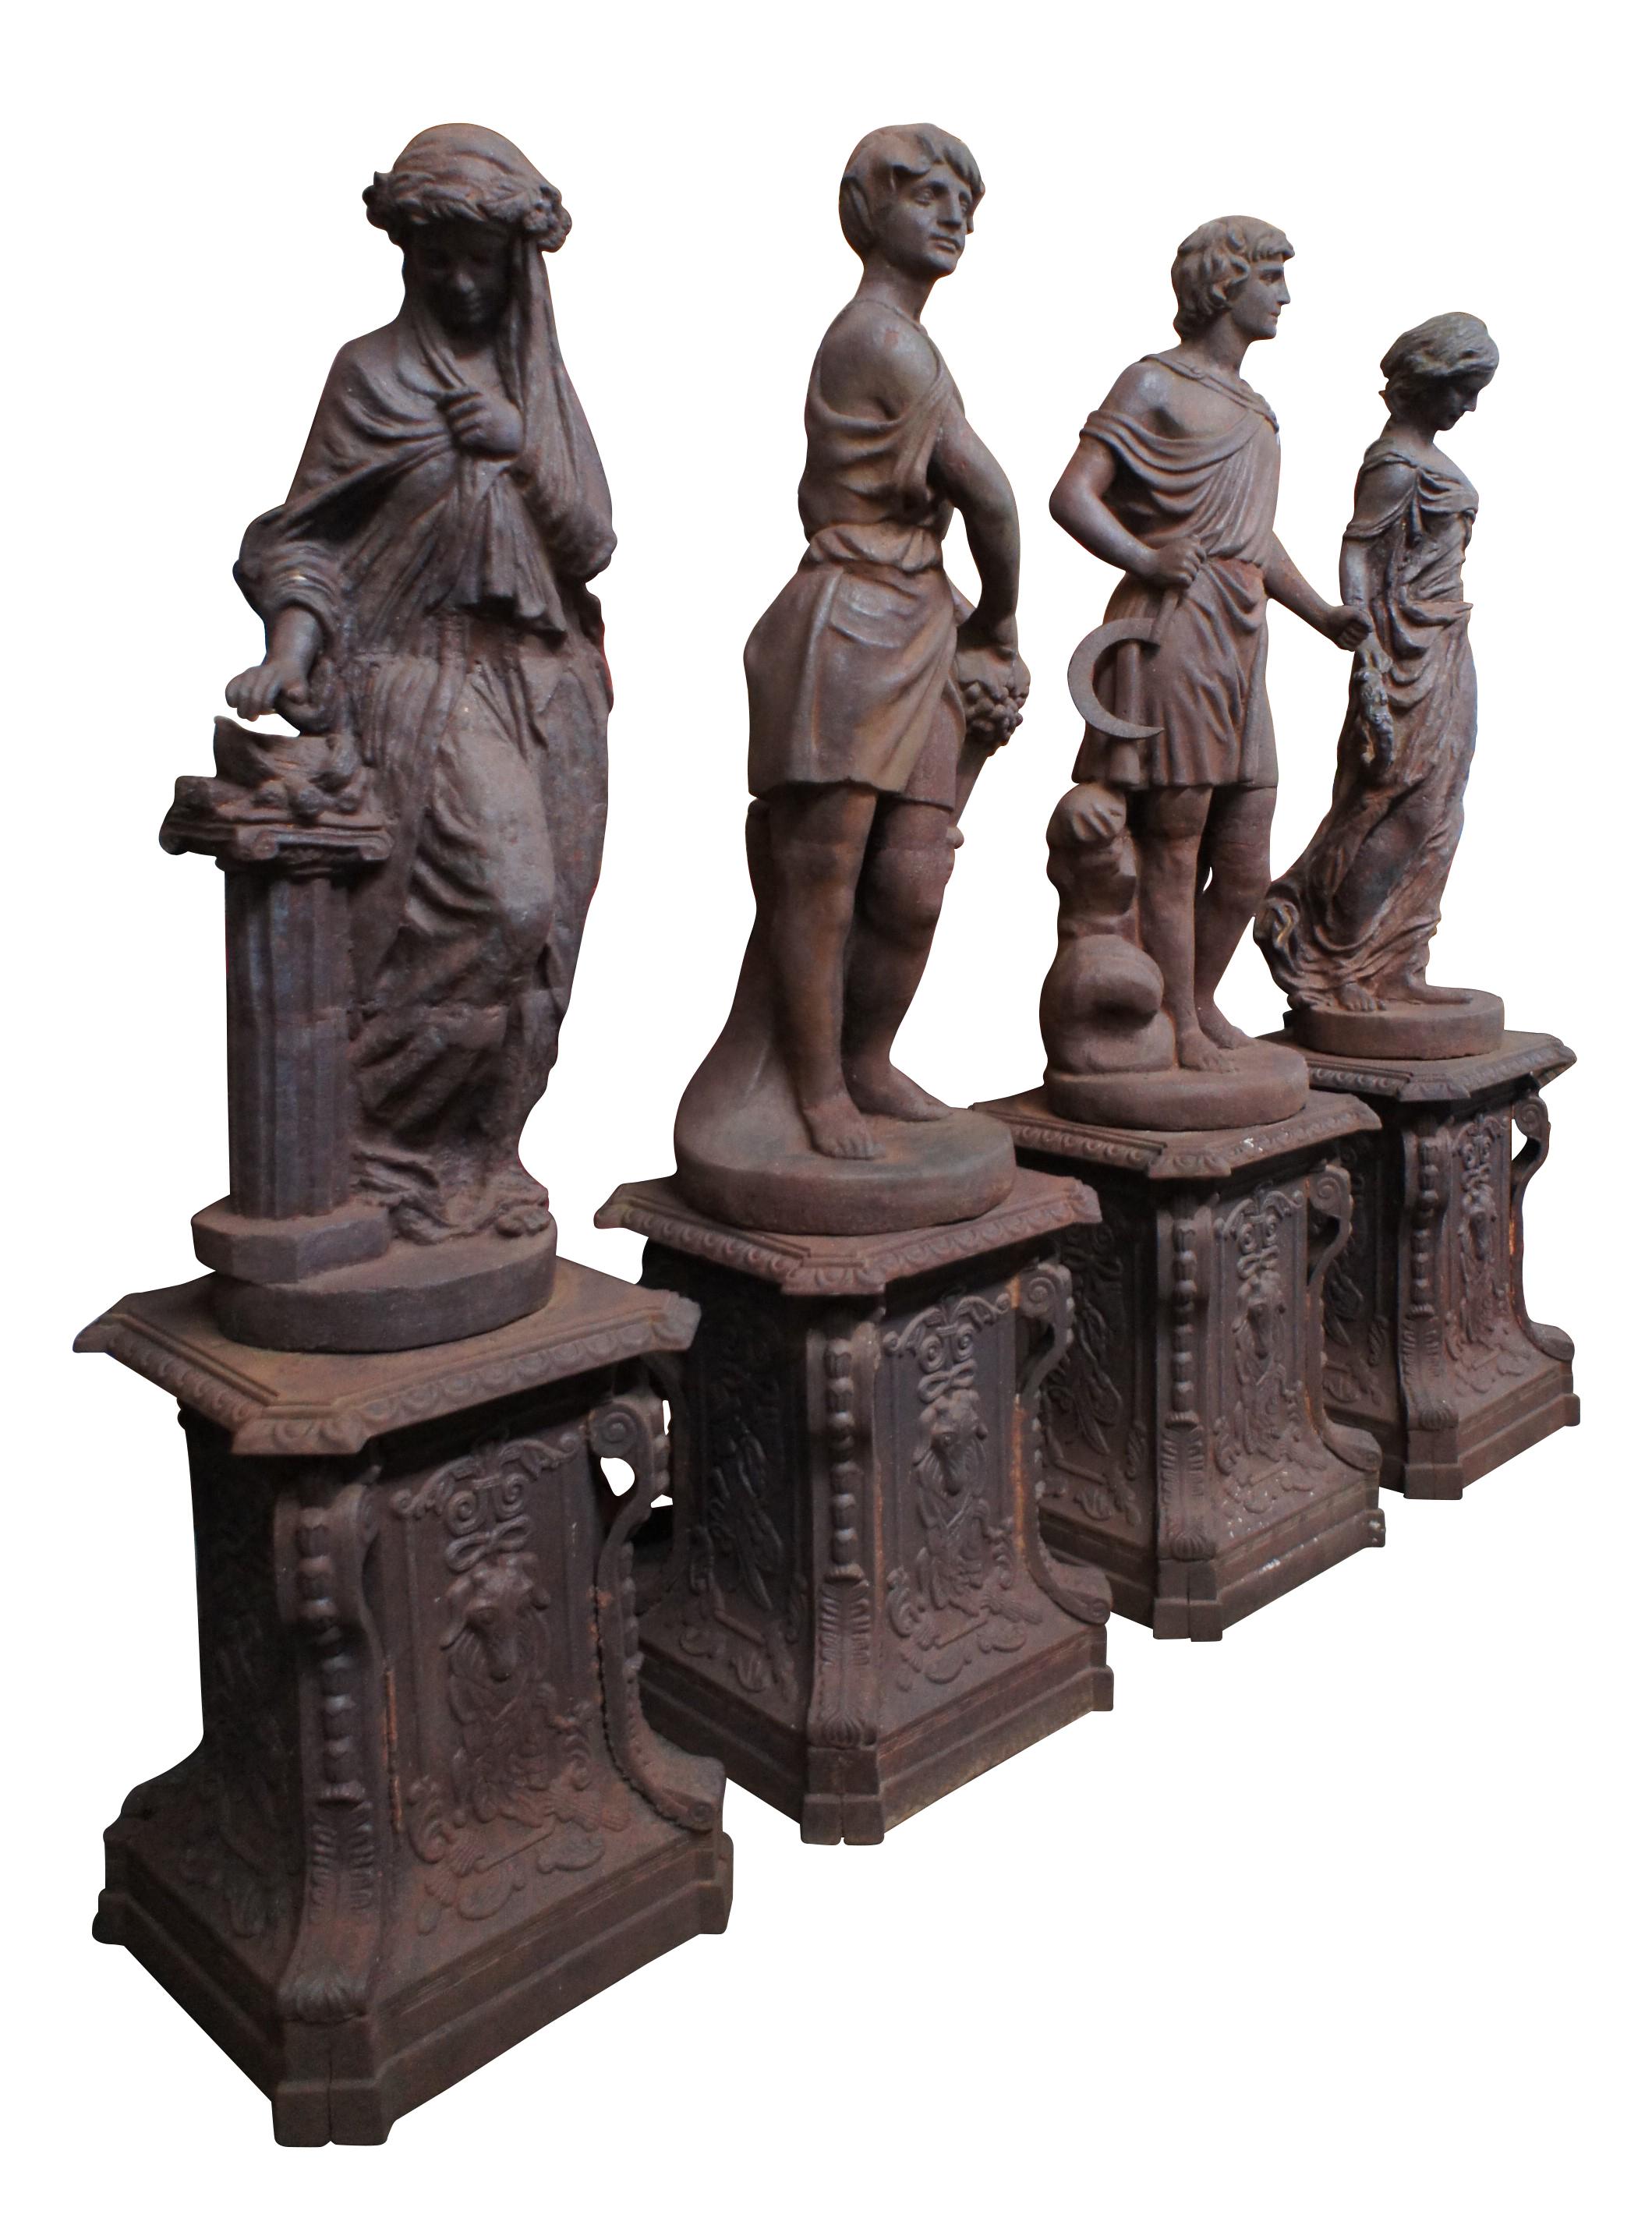 Monumental set of ''Four Seasons'' outdoor garden statues. Drawing inspiration from Victorian, Greek and Roman styling. Crafted with exceptional detail. Each figure is poised on a square pedestal with egg and dart molded edge over an ornate frame